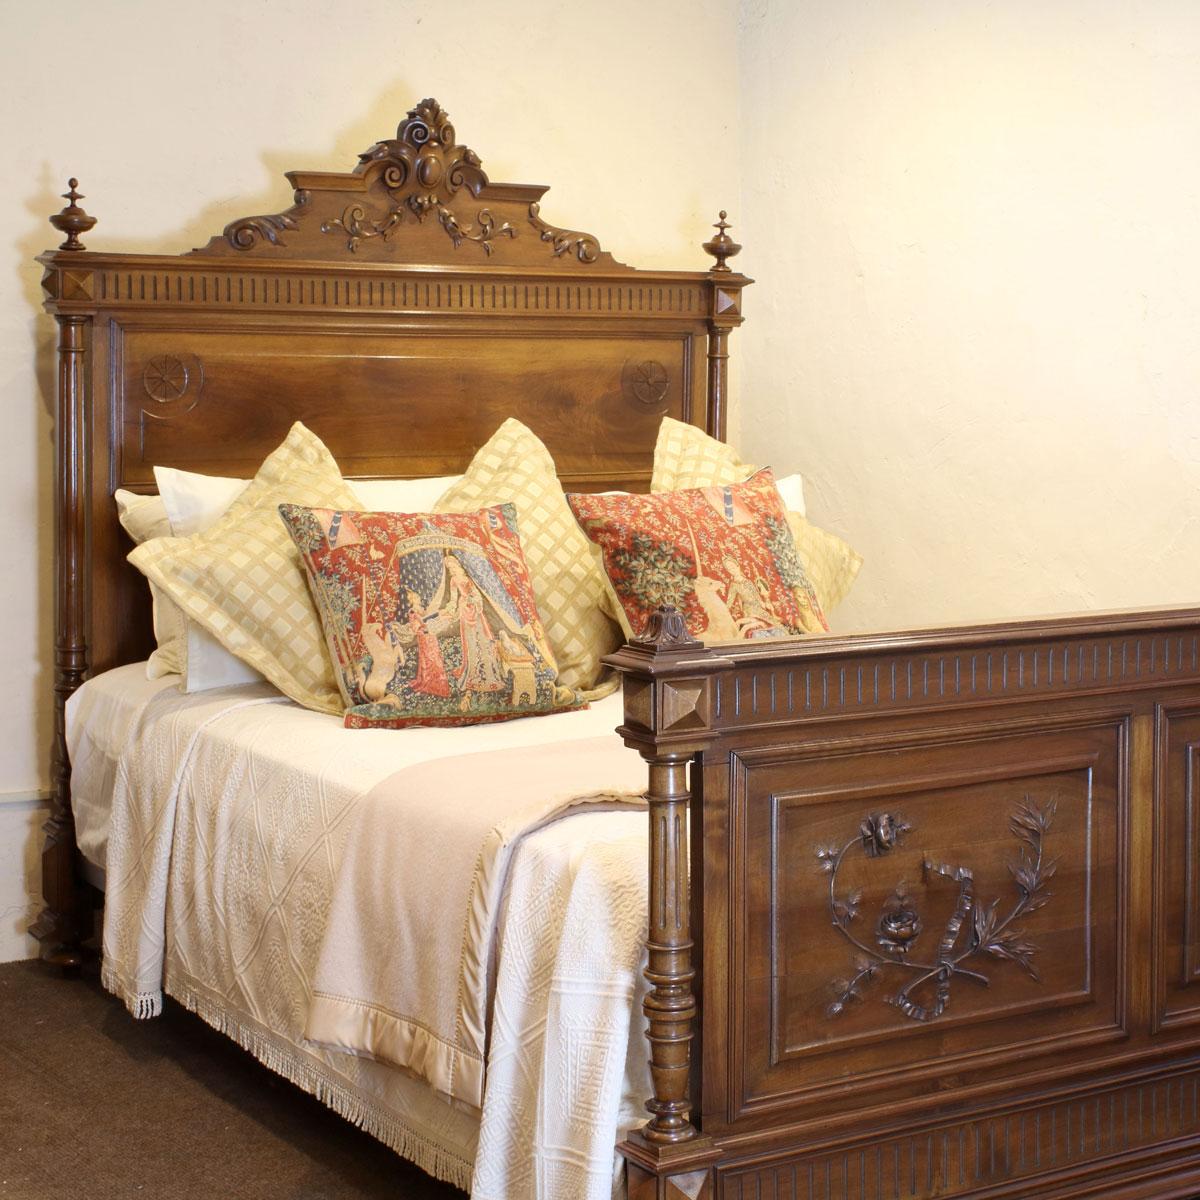 A Renaissance style walnut bedstead with stunning decorative panels and turned posts. 

This bed accepts a British king size or American queen size, 5ft wide (60 inches or 150cm) base and mattress set.

The price includes a firm bed base to